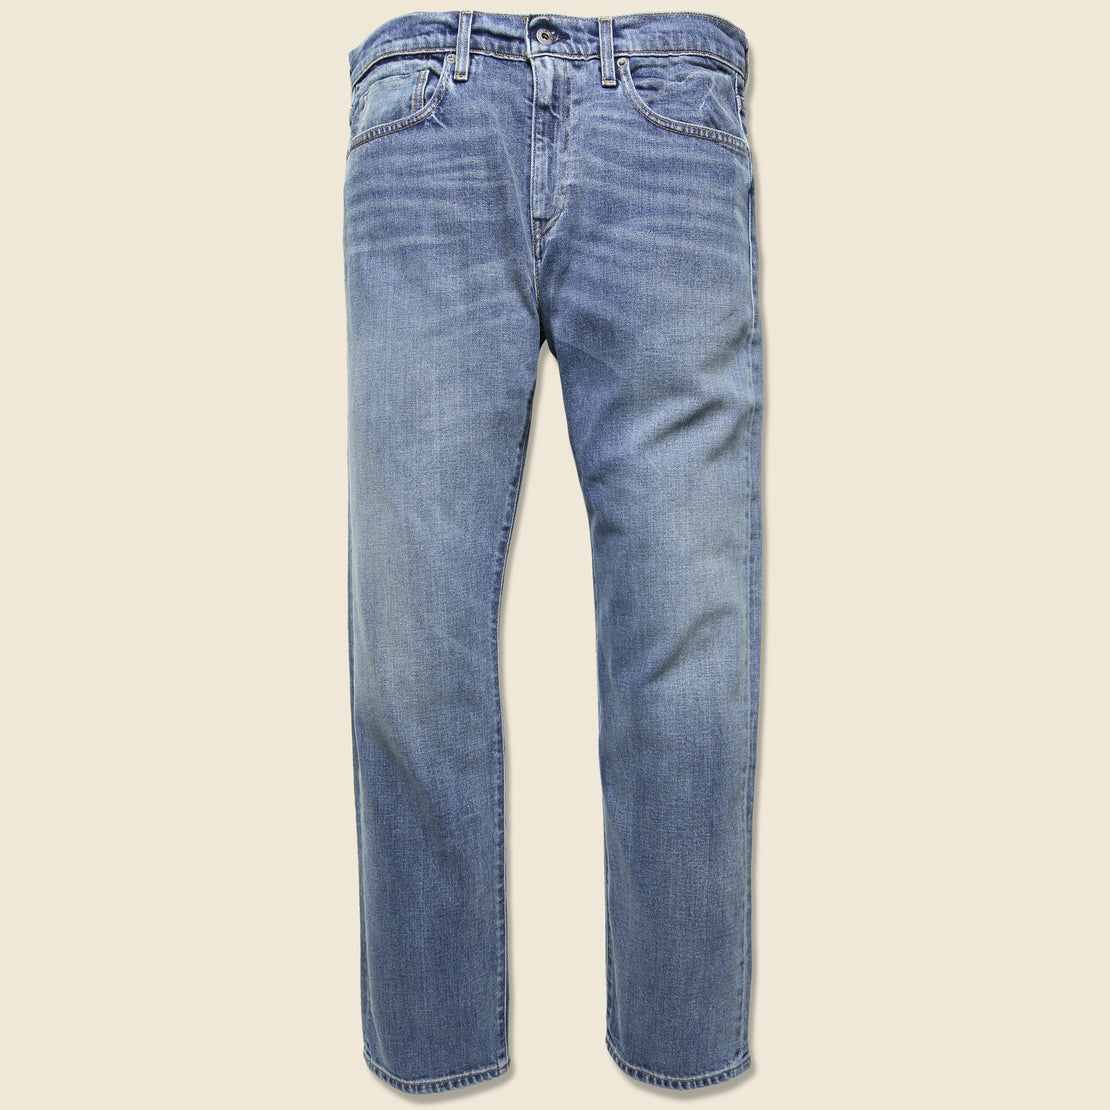 Levis Made & Crafted 502 Taper Jean - Murphy